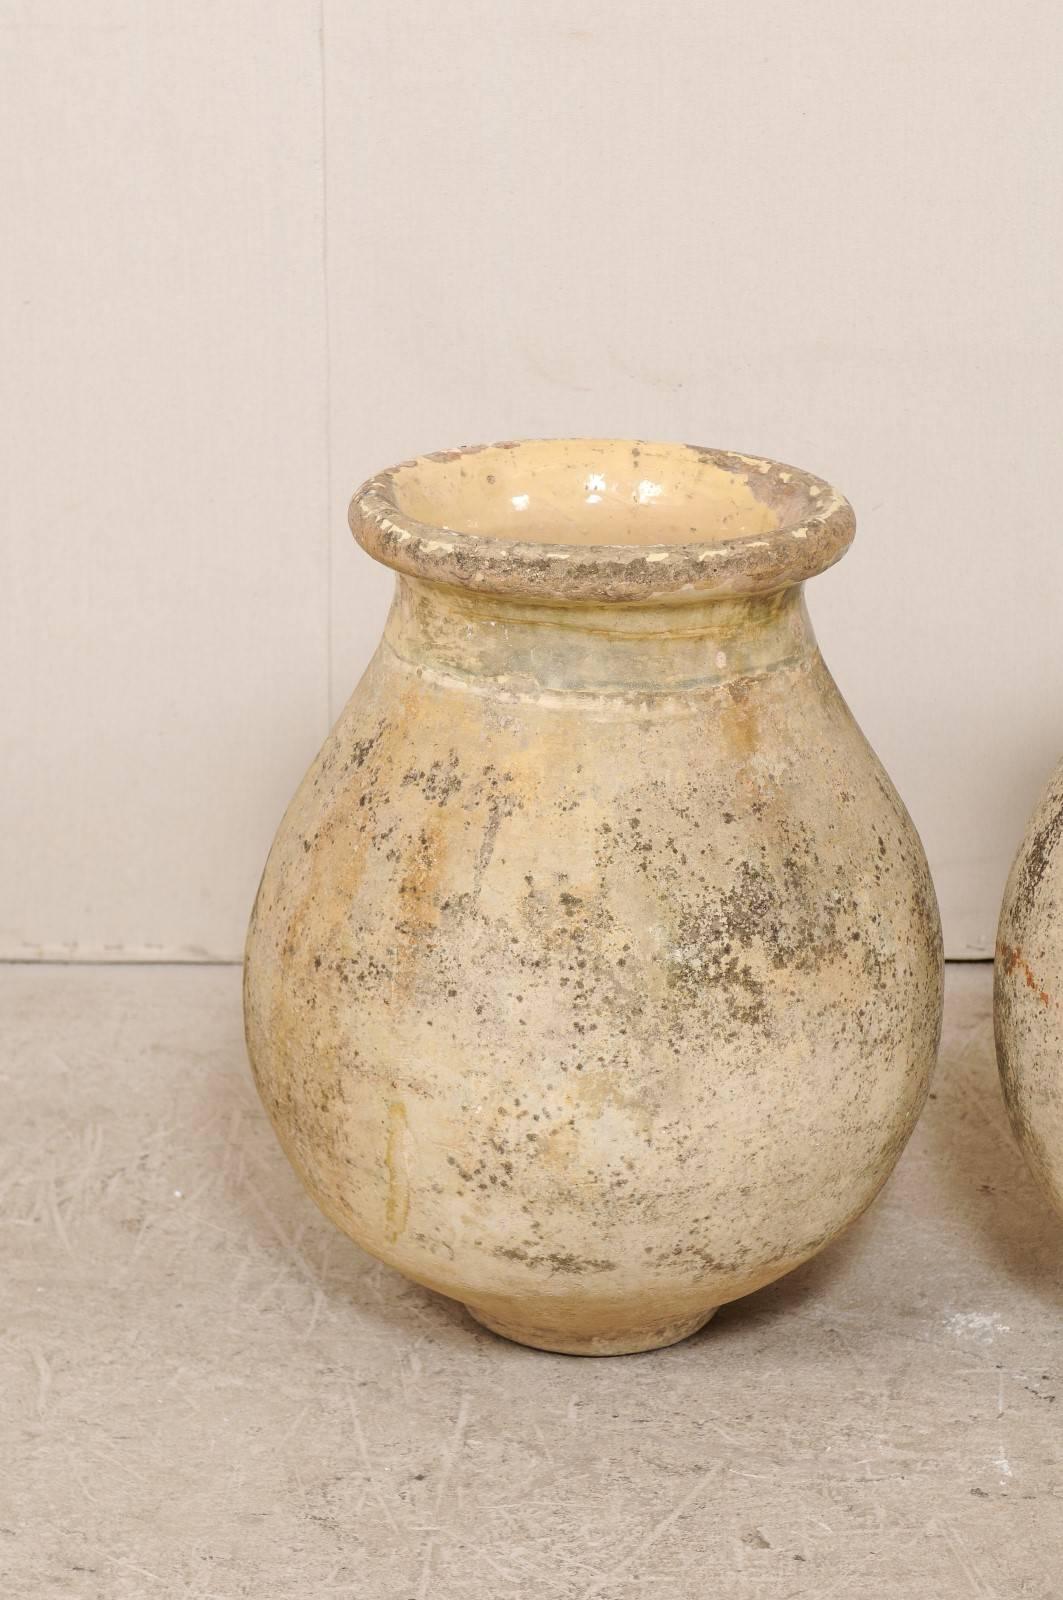 French Pair of 19th Century Jars from the Village of Biot, France with Glaze Remains